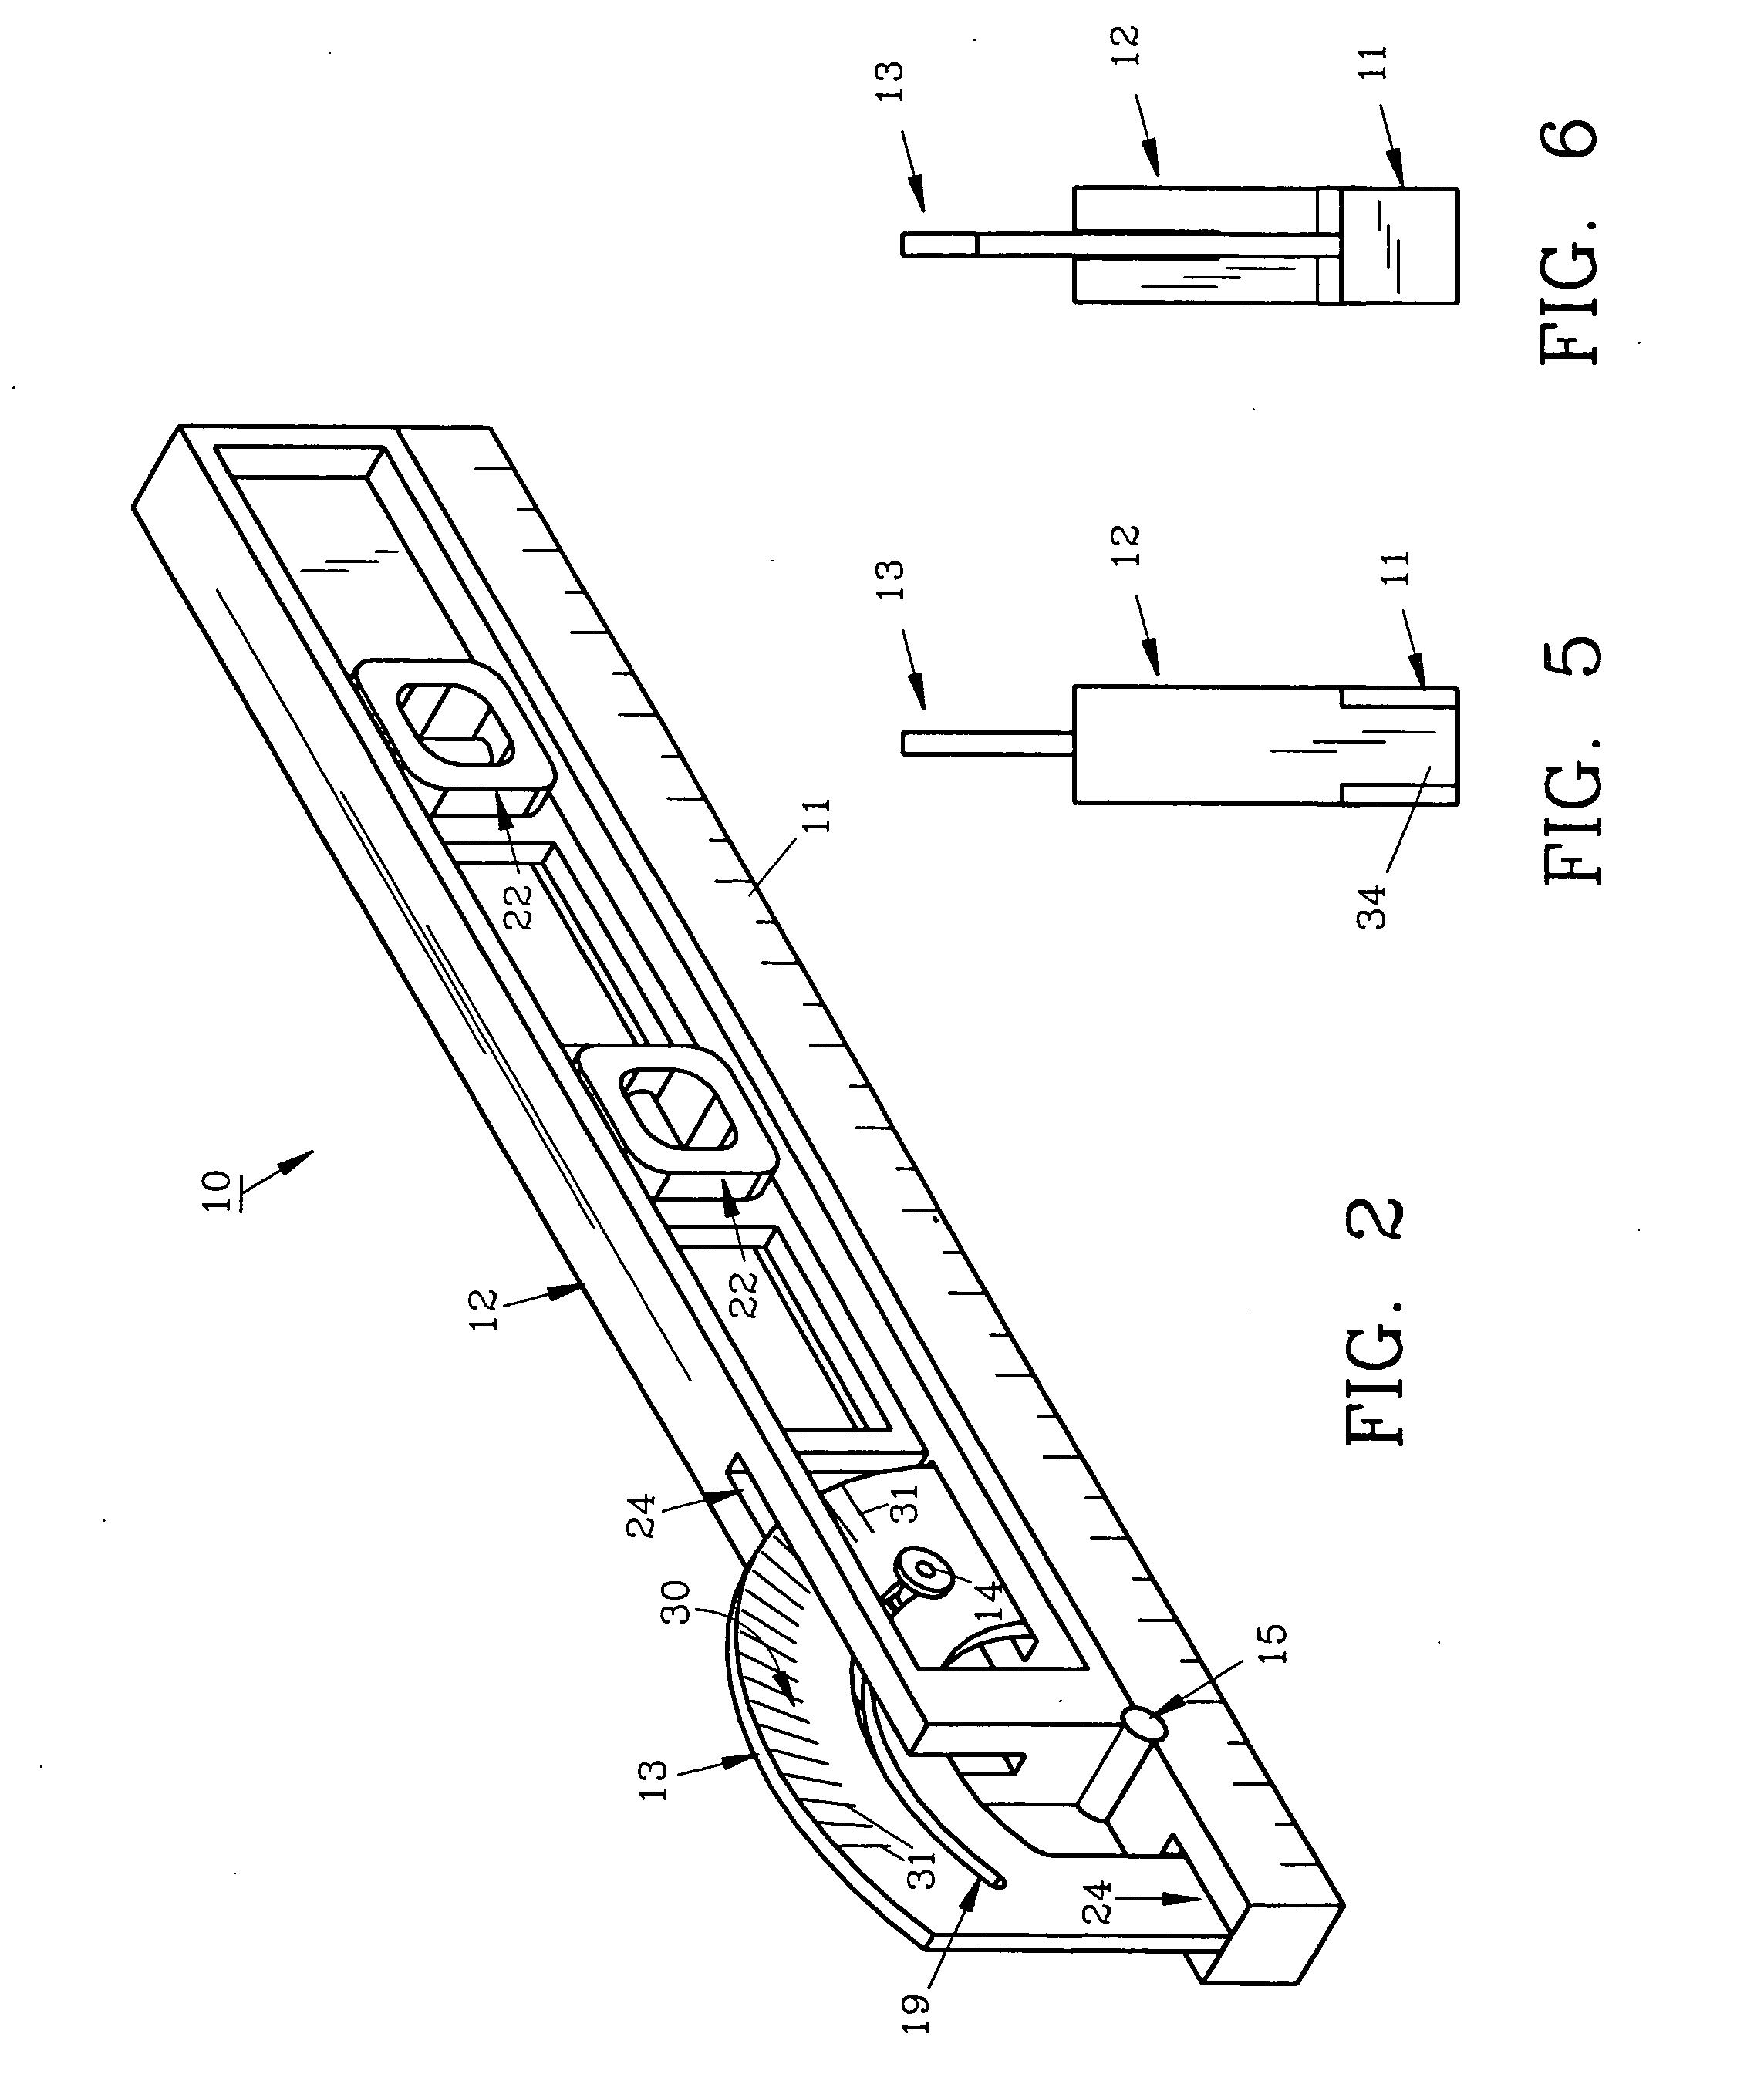 Angle measuring device and guide